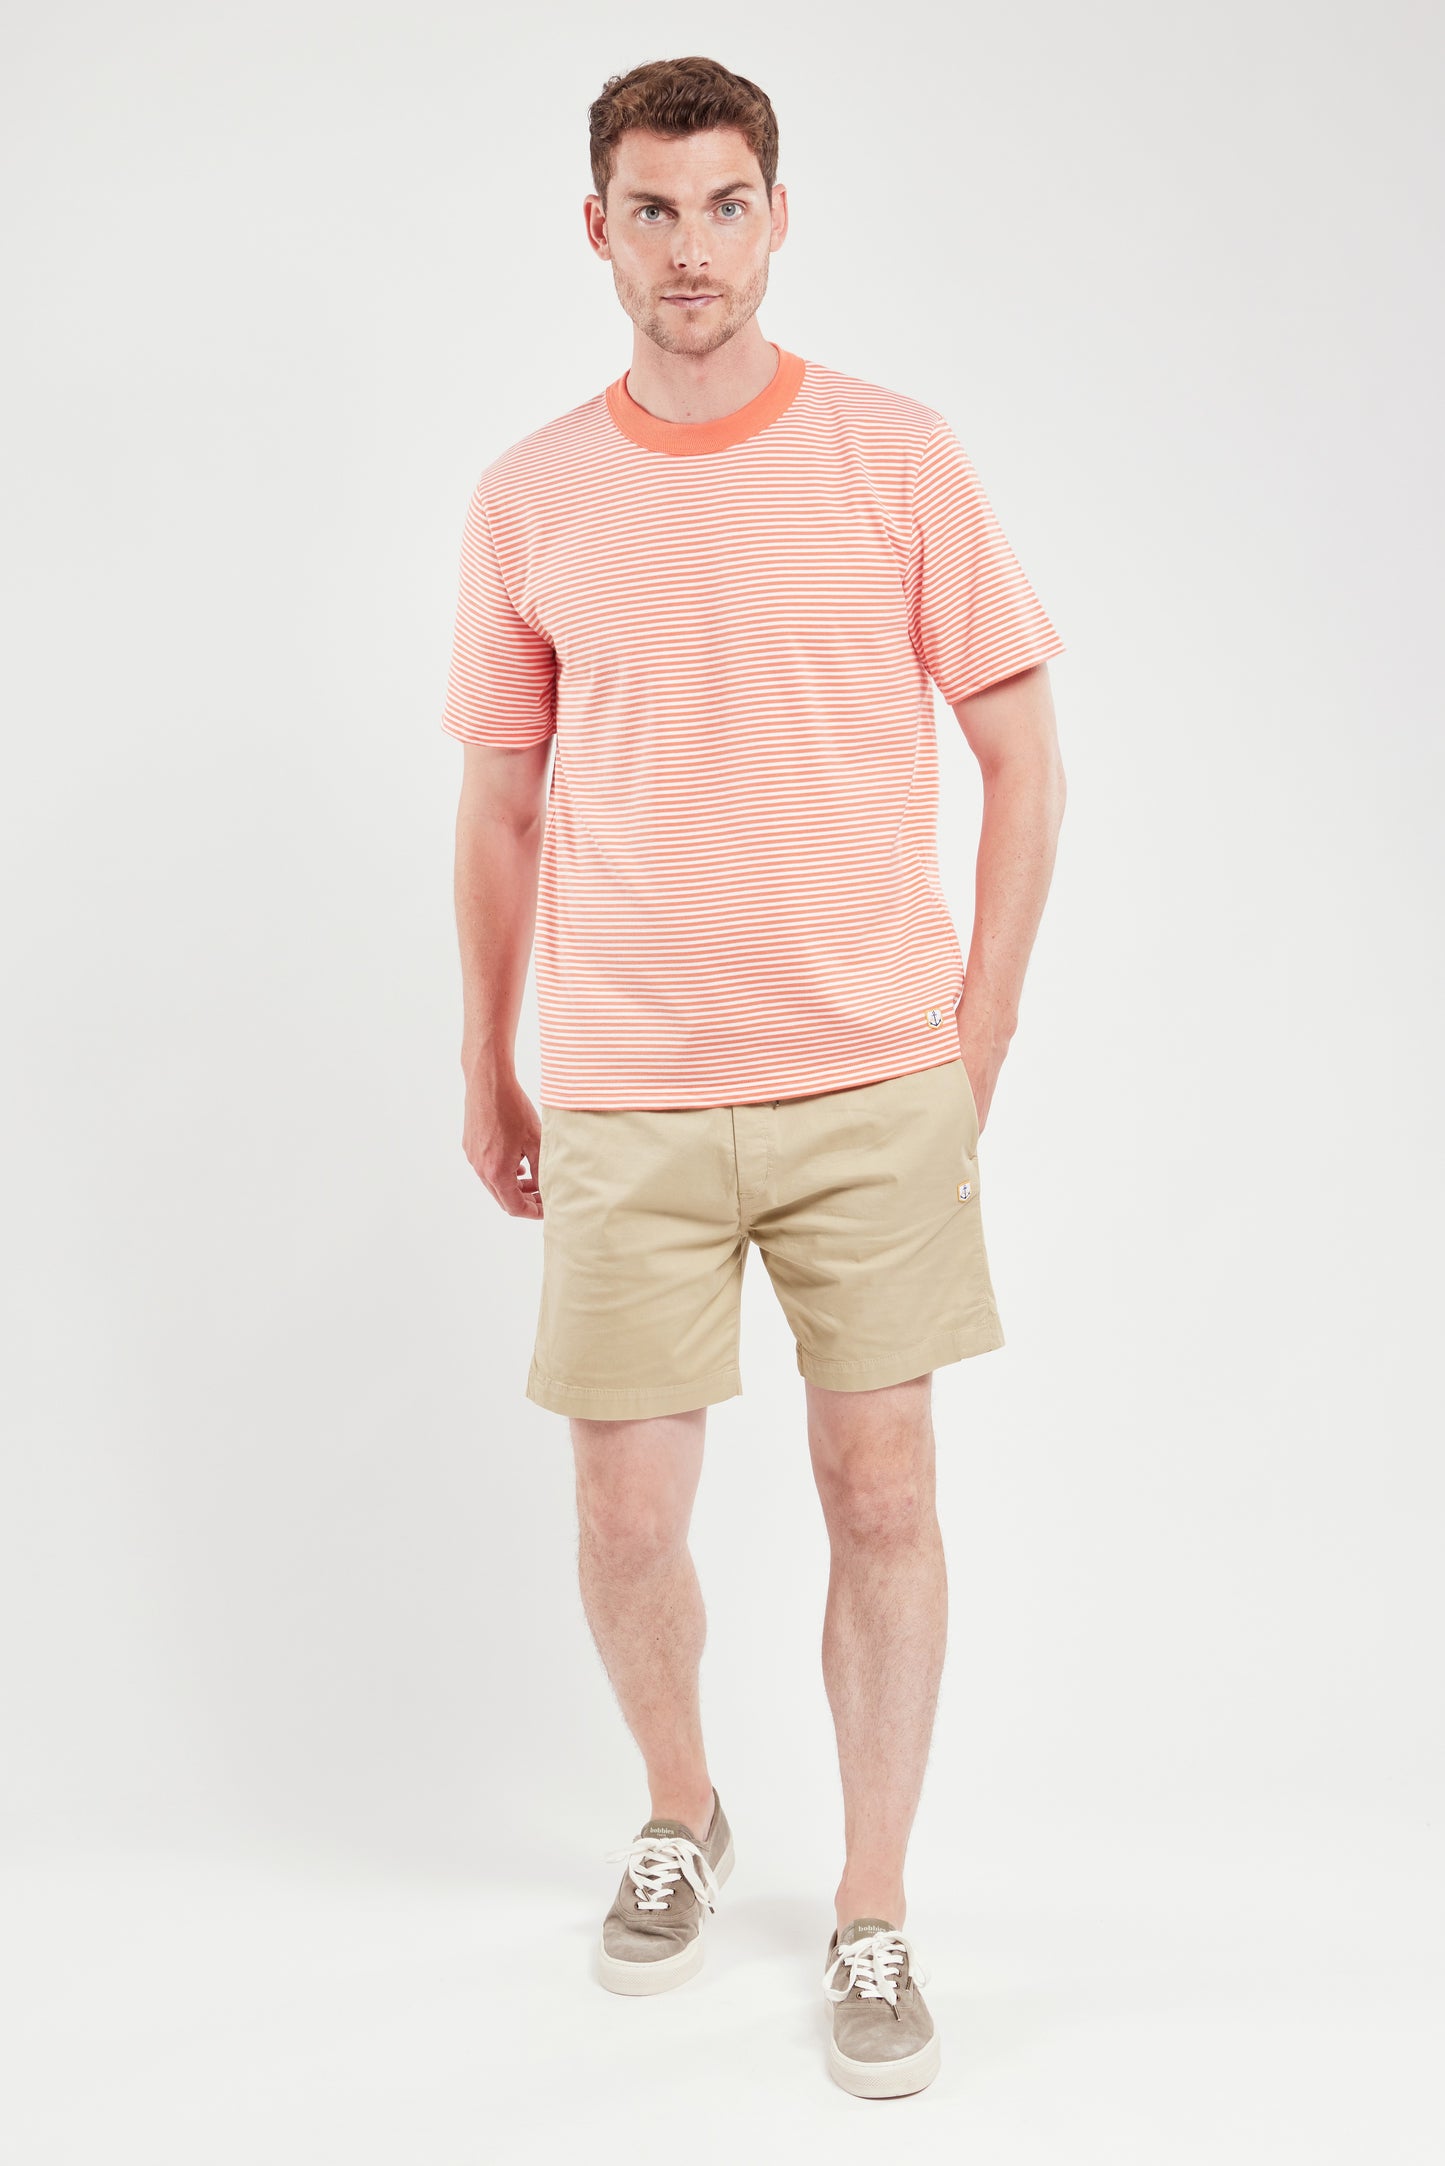 Armor Lux Striped Heritage Short Sleeve Striped T-Shirt in coral and milk